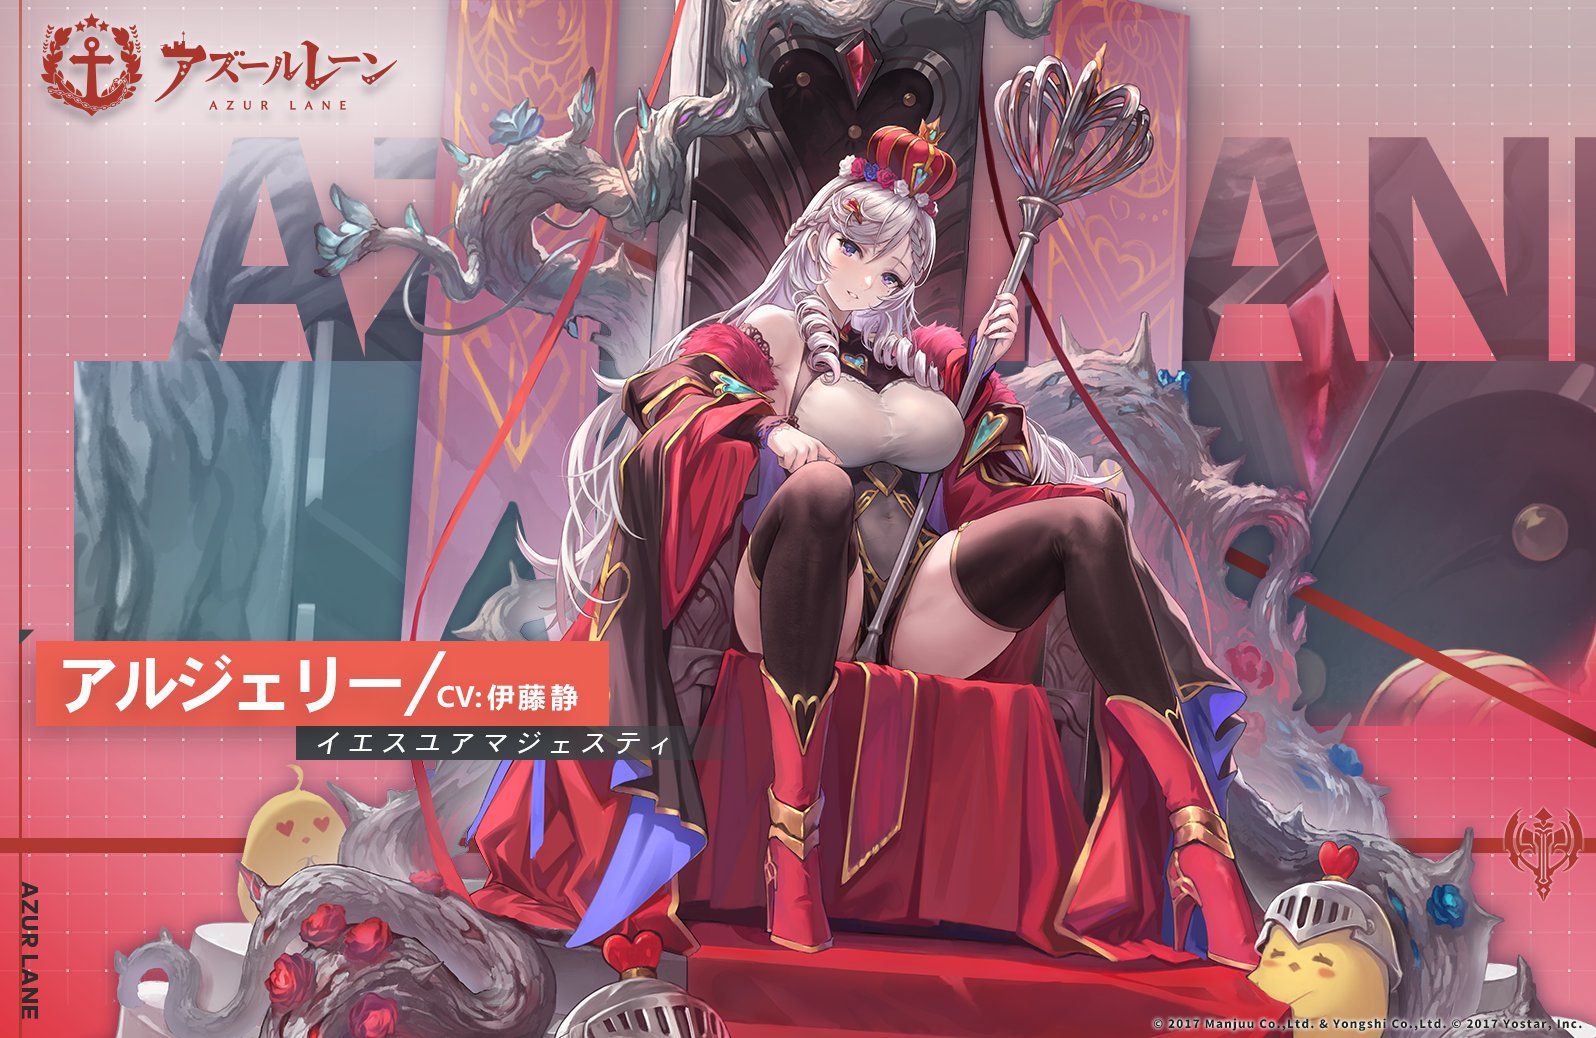 "Azure Lane" Erotic new character with outrageous erotic chimuchi boobs and super high leg dos kebe clothes 5